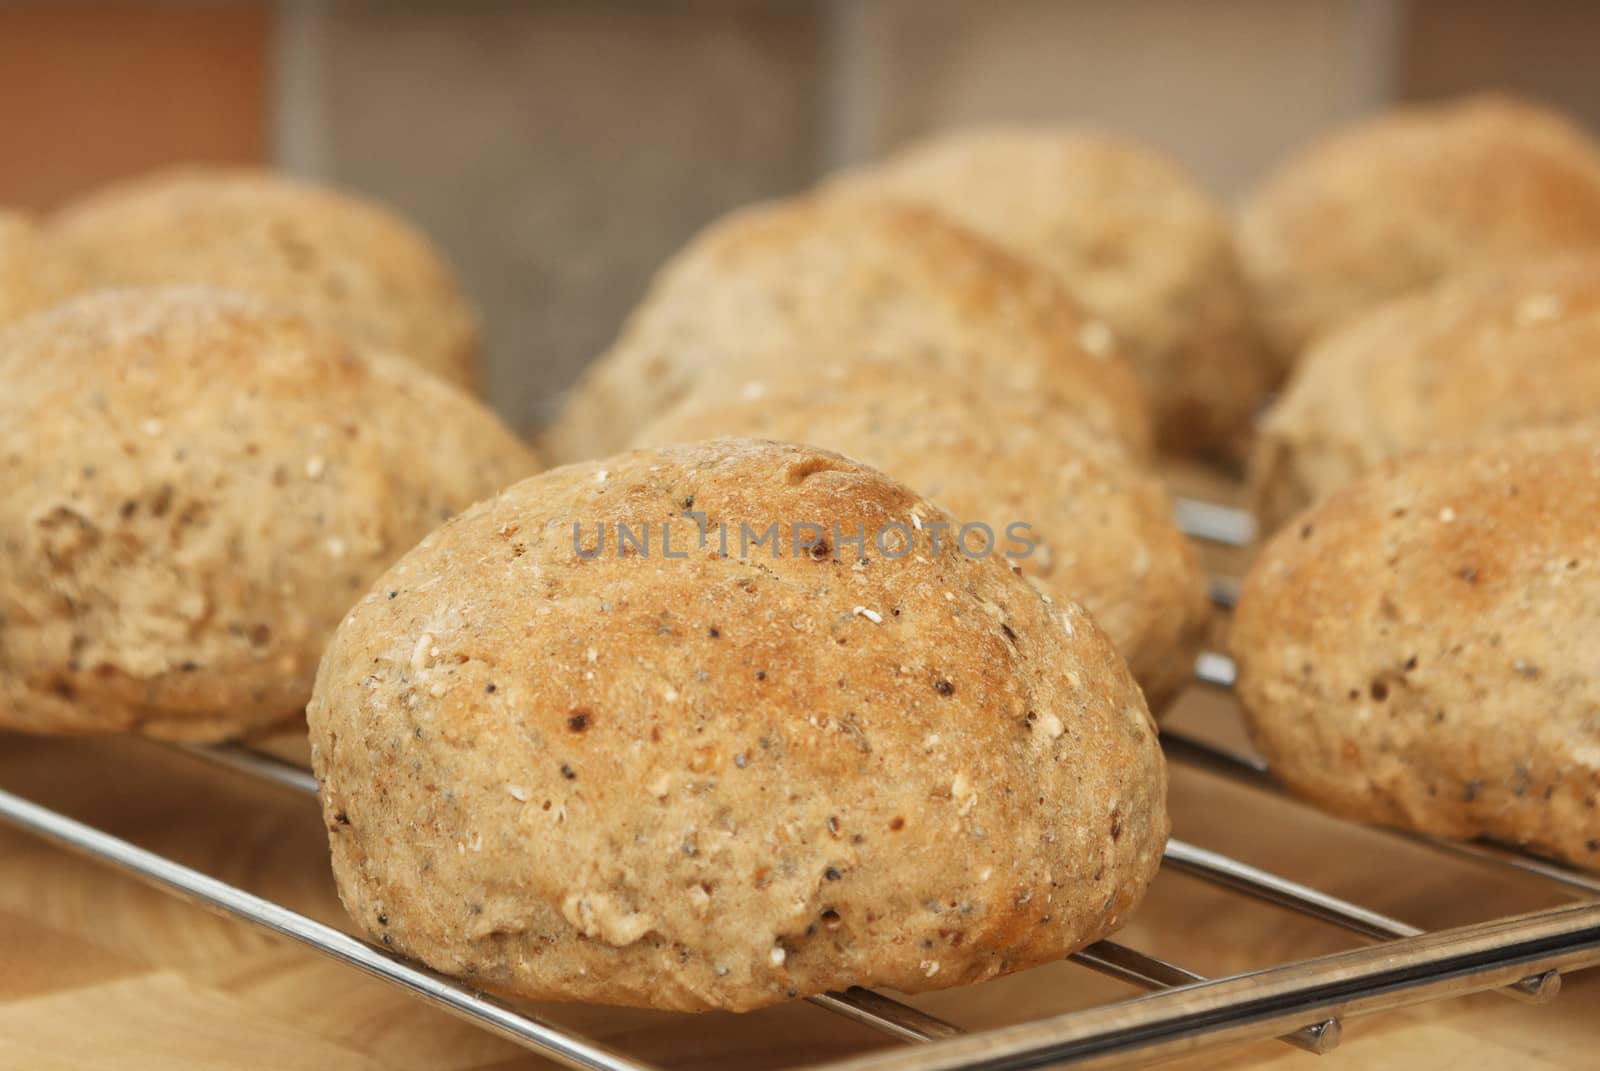 Close up of home made wholemeal bread rolls fresh from the oven, cooling on a wire rack, in a domestic kitchen setting